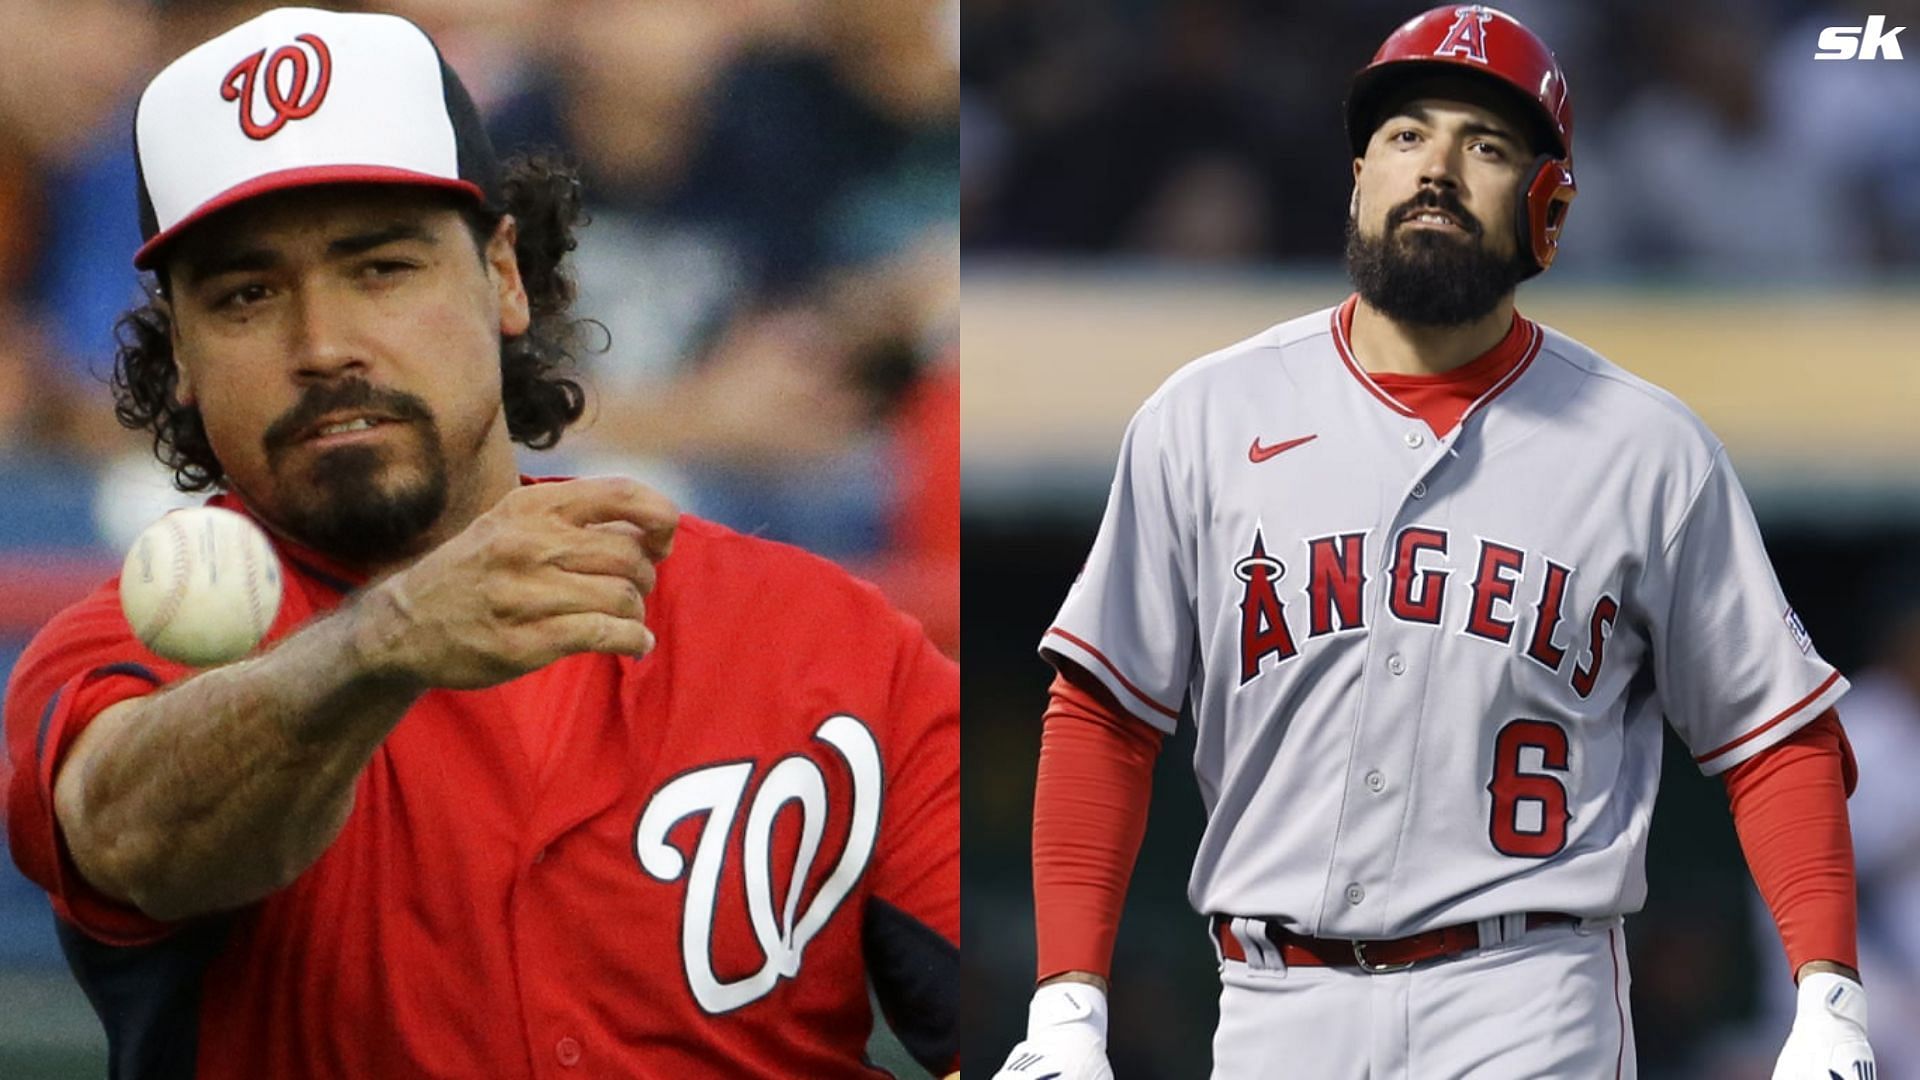 When Anthony Rendon dodged injury related questions with sarcastic remark